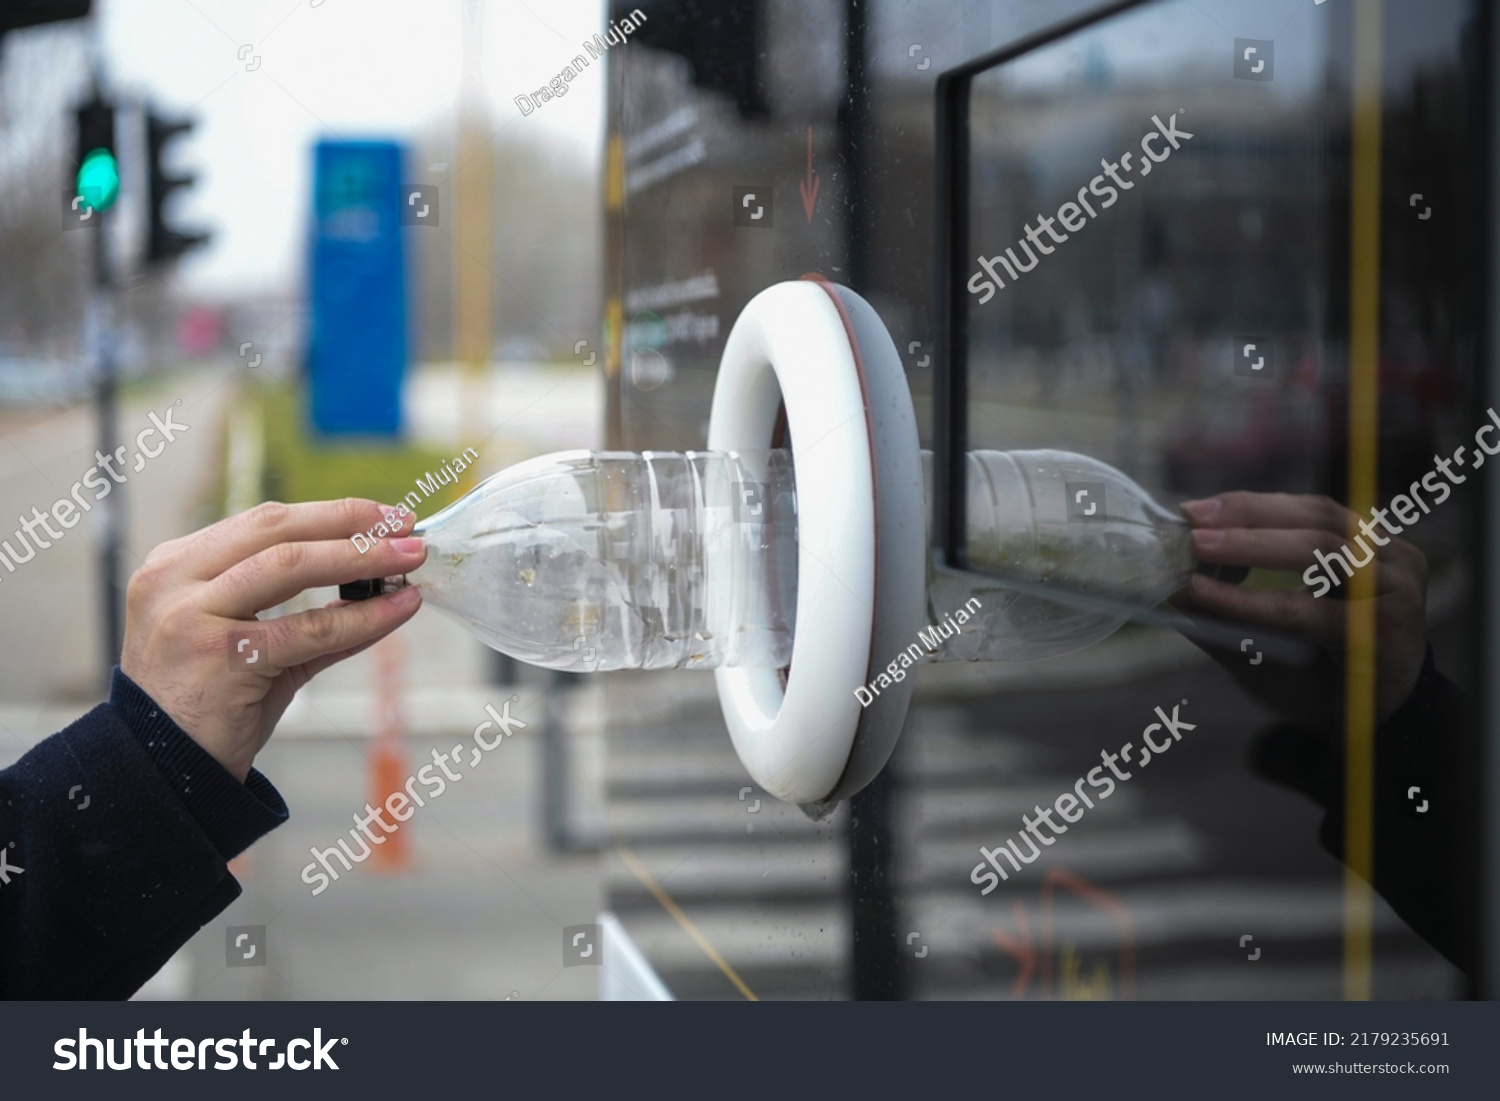 Reverse Vending Recycling Machine. Recycling machine that dispenses cash. Man hand puts plastic bottle to the machine. Shoppers return their bottles and cans. #2179235691